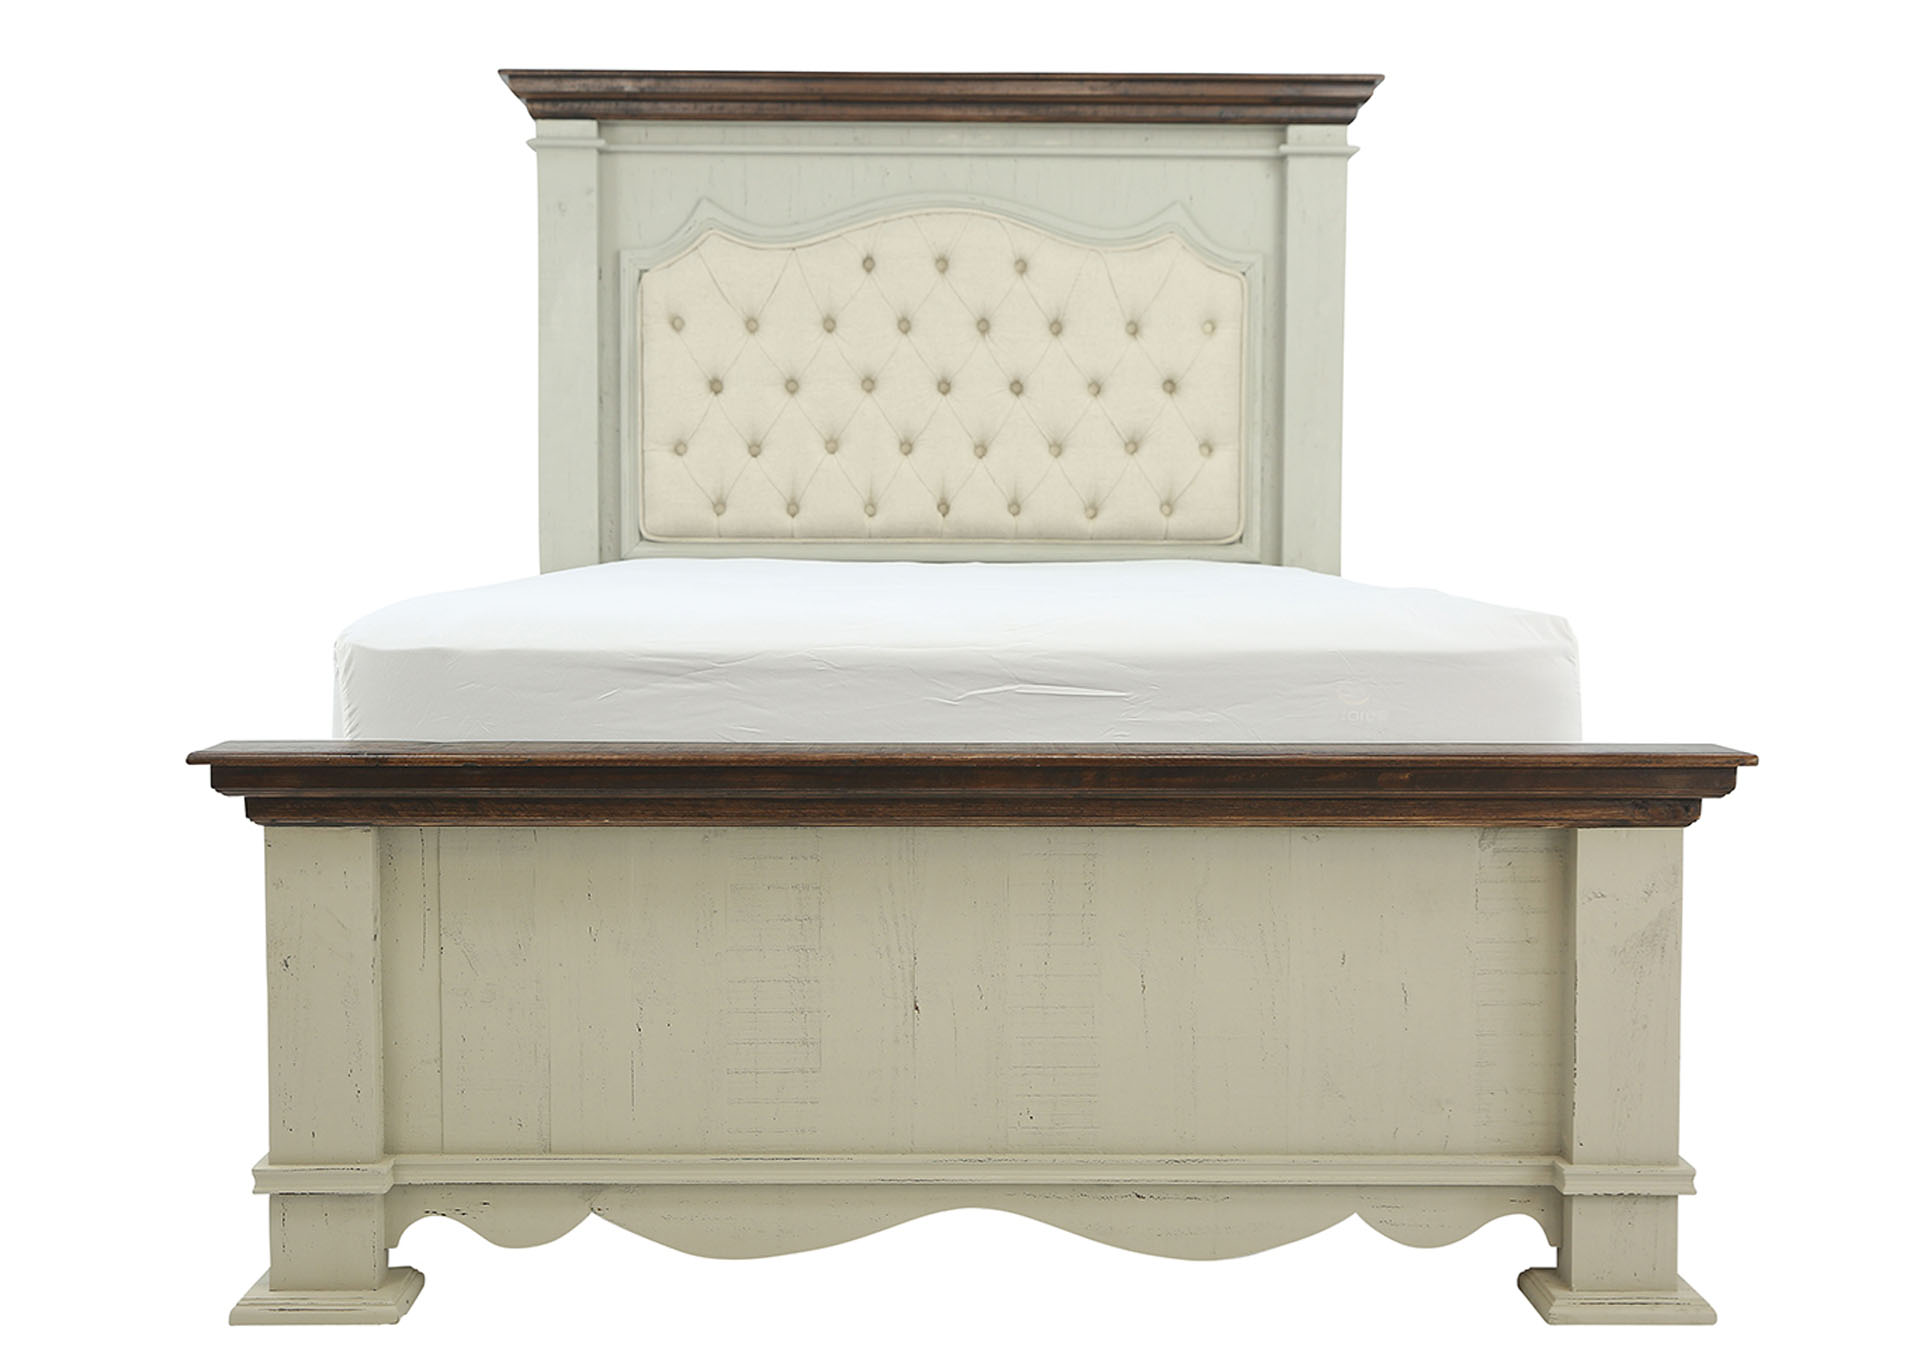 FIFTH AVENUE TWO TONE KING BED